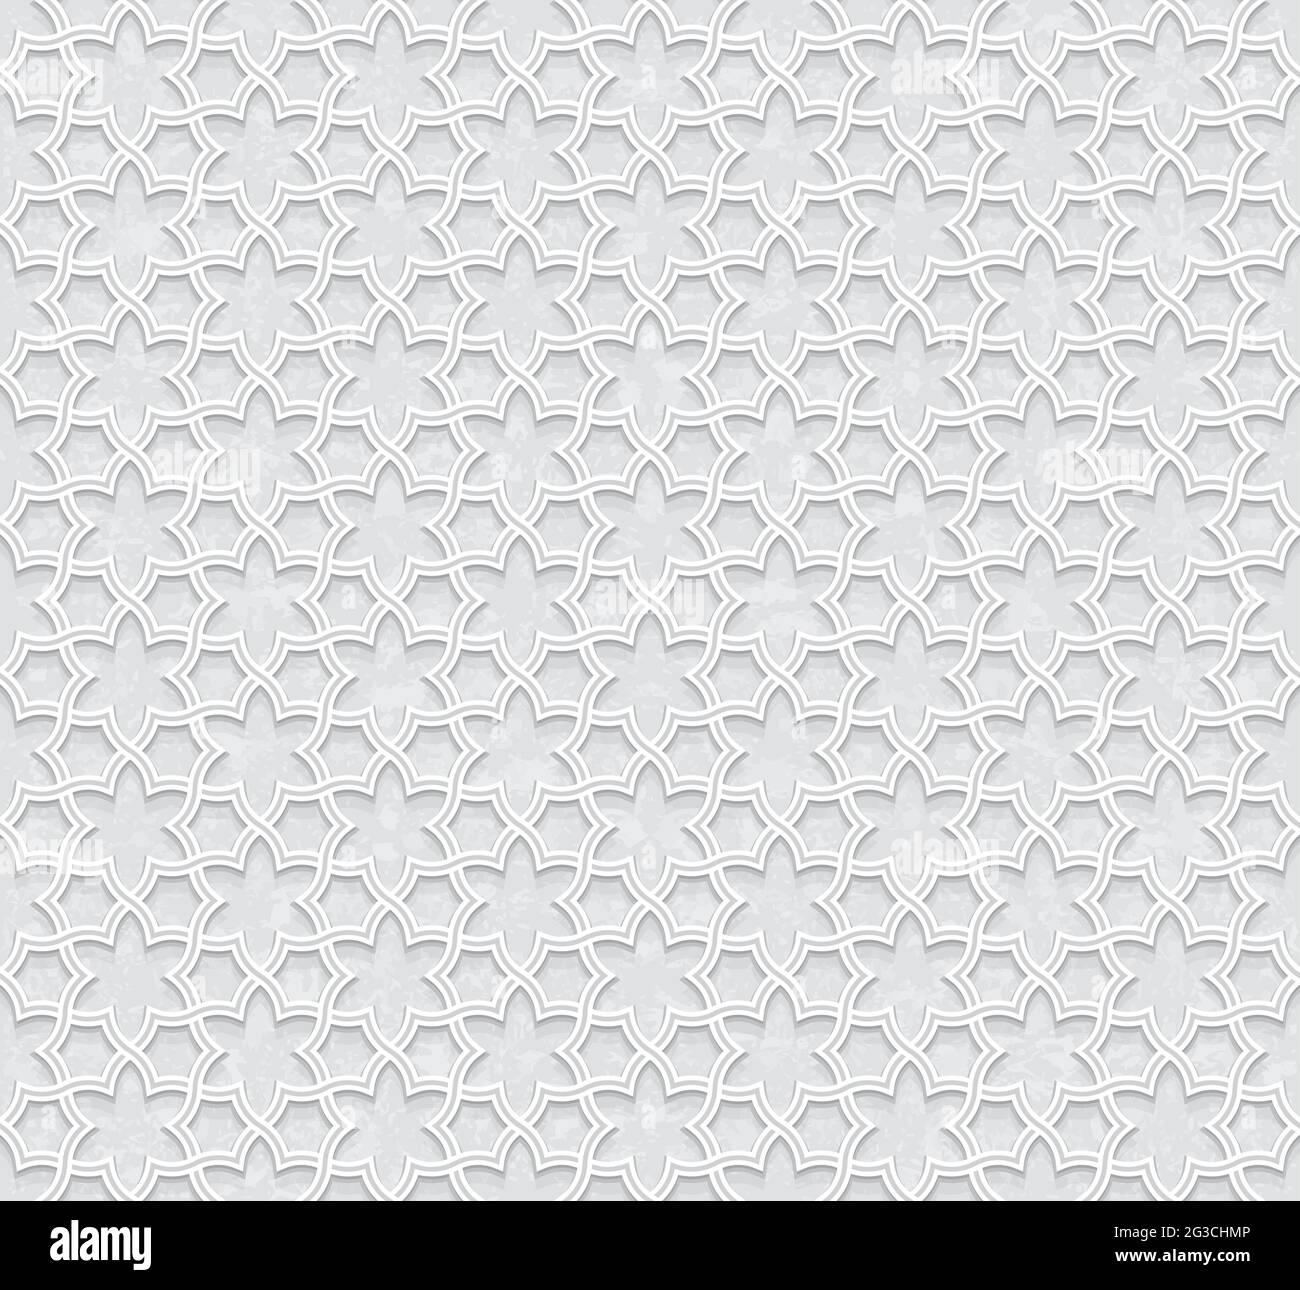 Geometric floral pattern with Light Grey Grunge Background, Vector Illustration Stock Vector